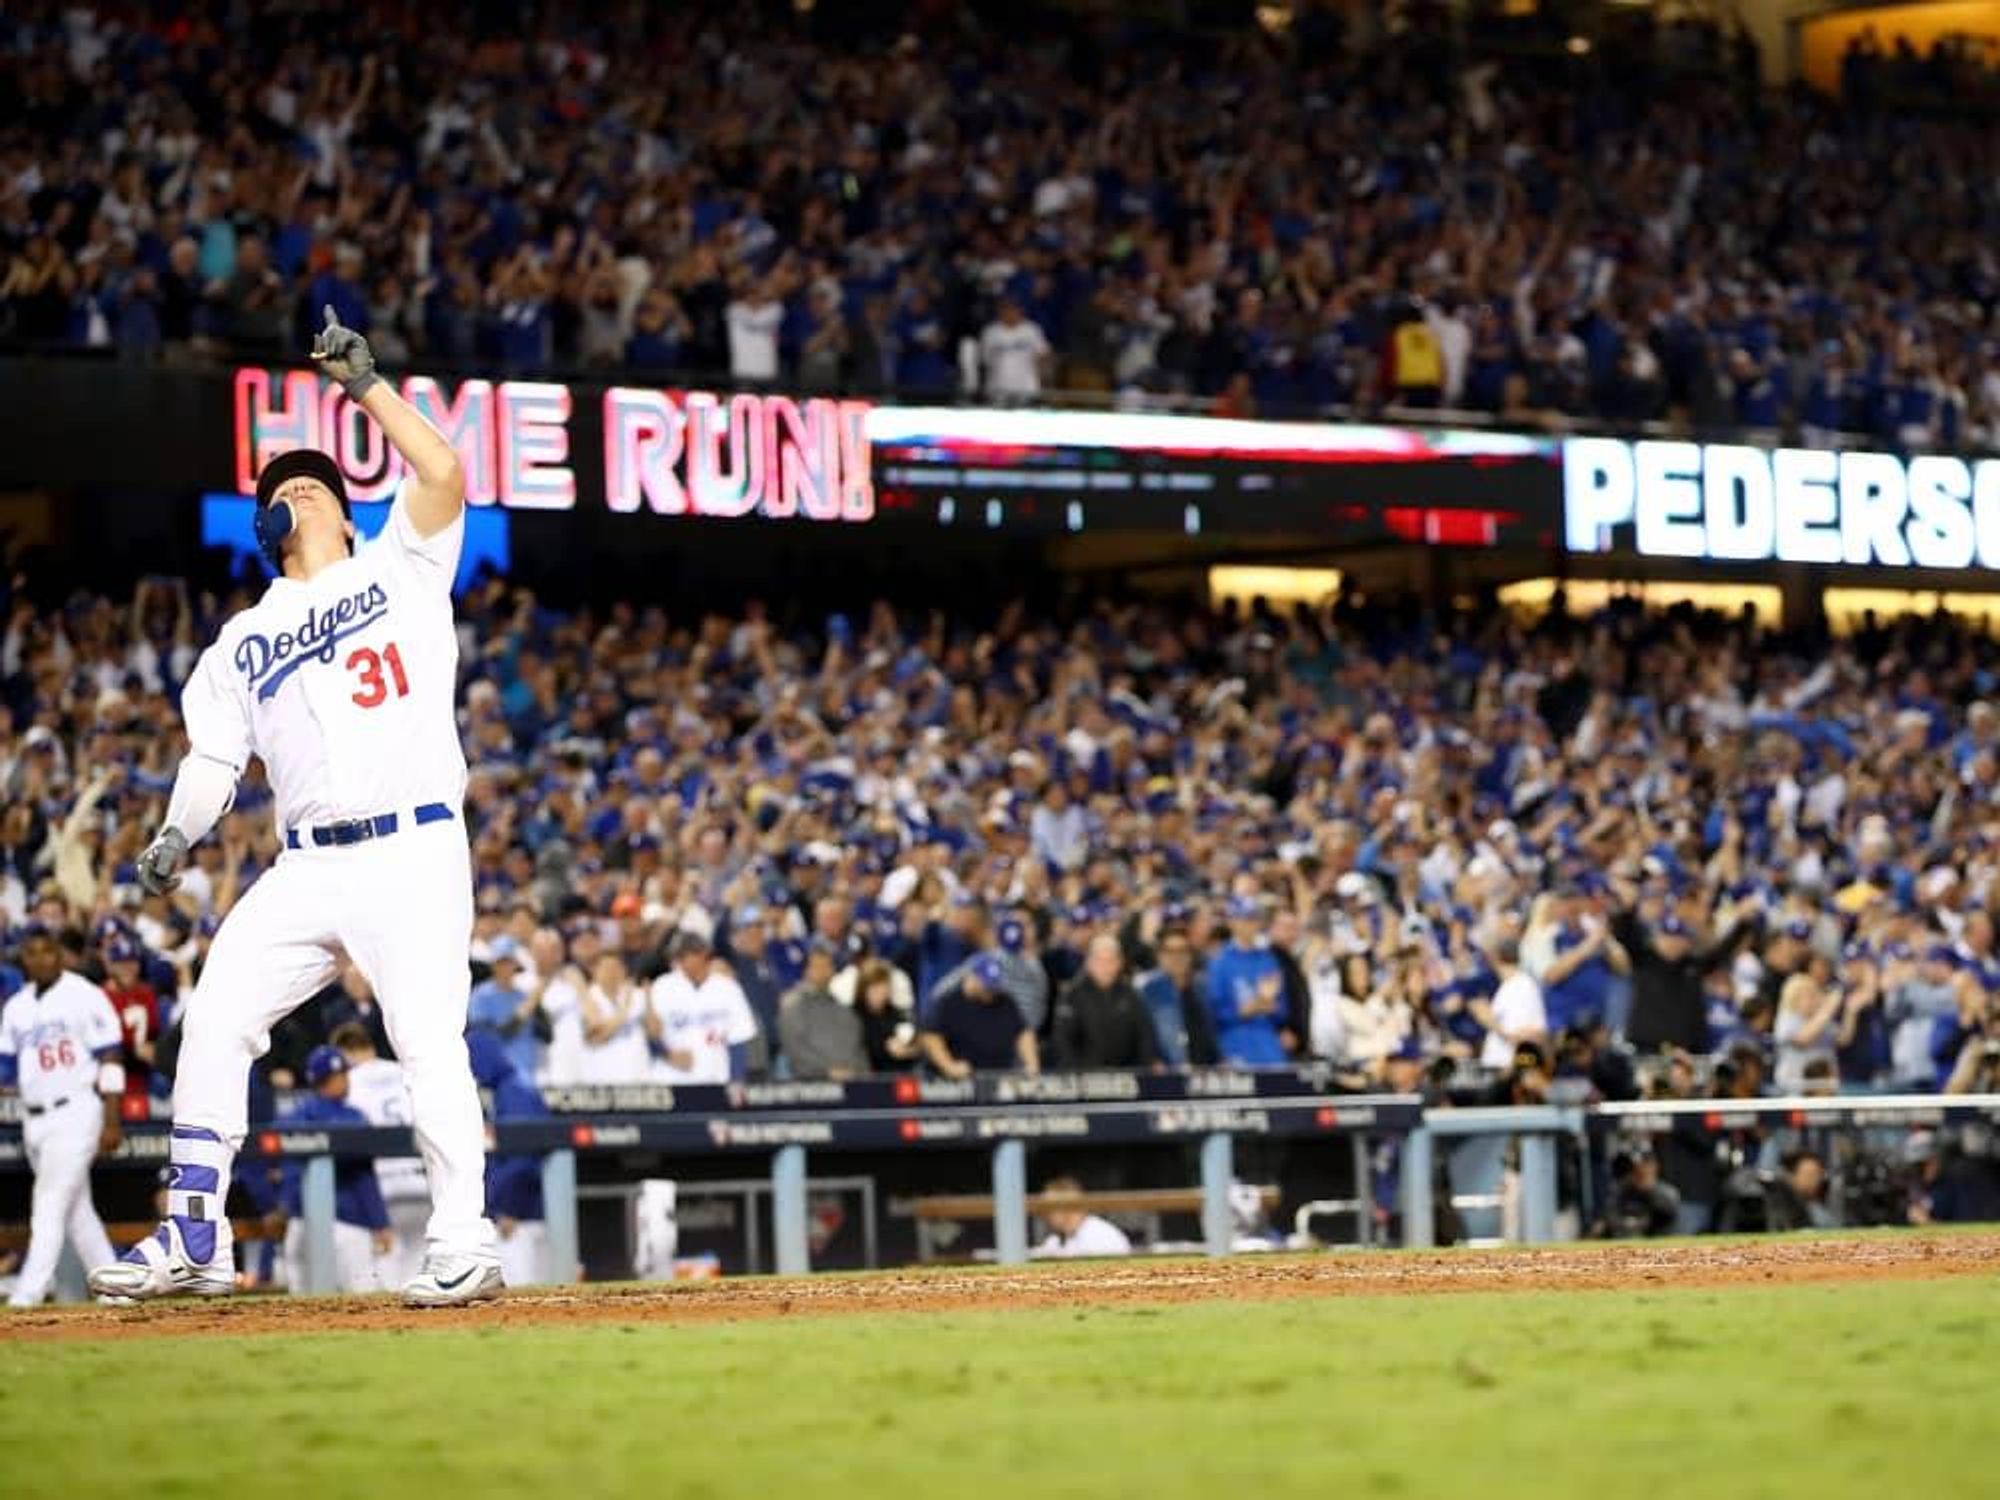 Joc Pederson hits home run as Dodgers beat Astros in World Series Game 6